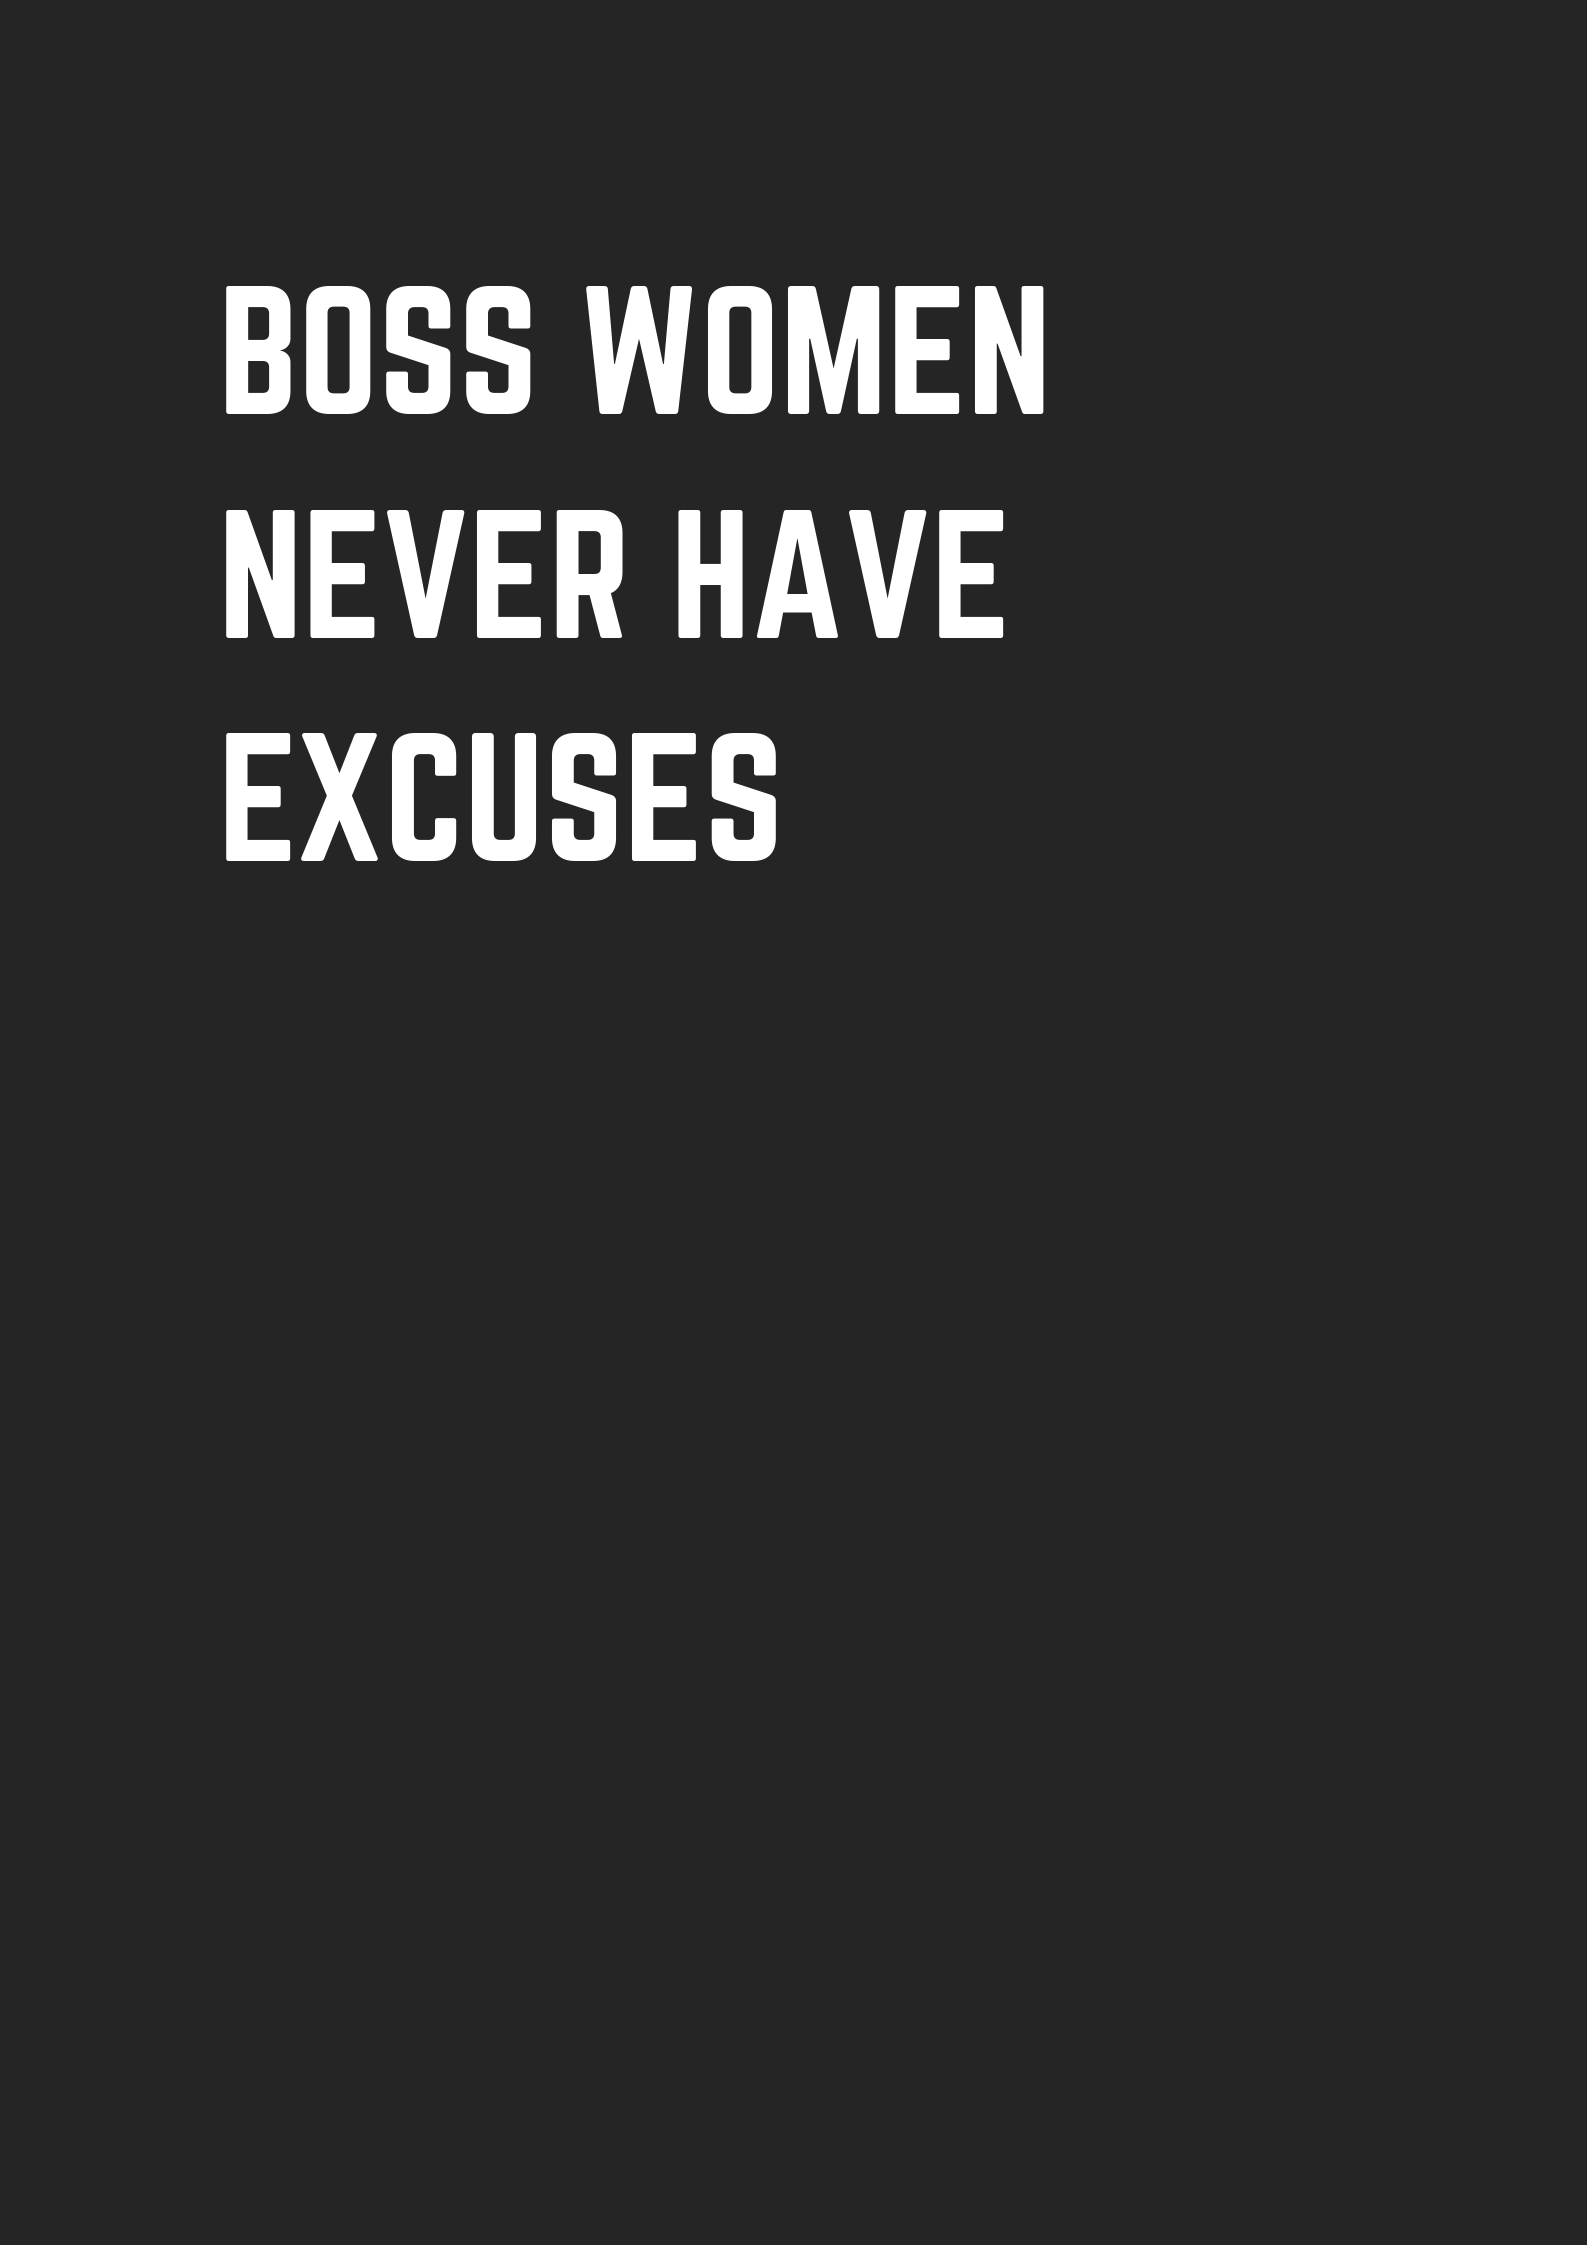 25 Women Boss Quotes To Shake The World Museuly